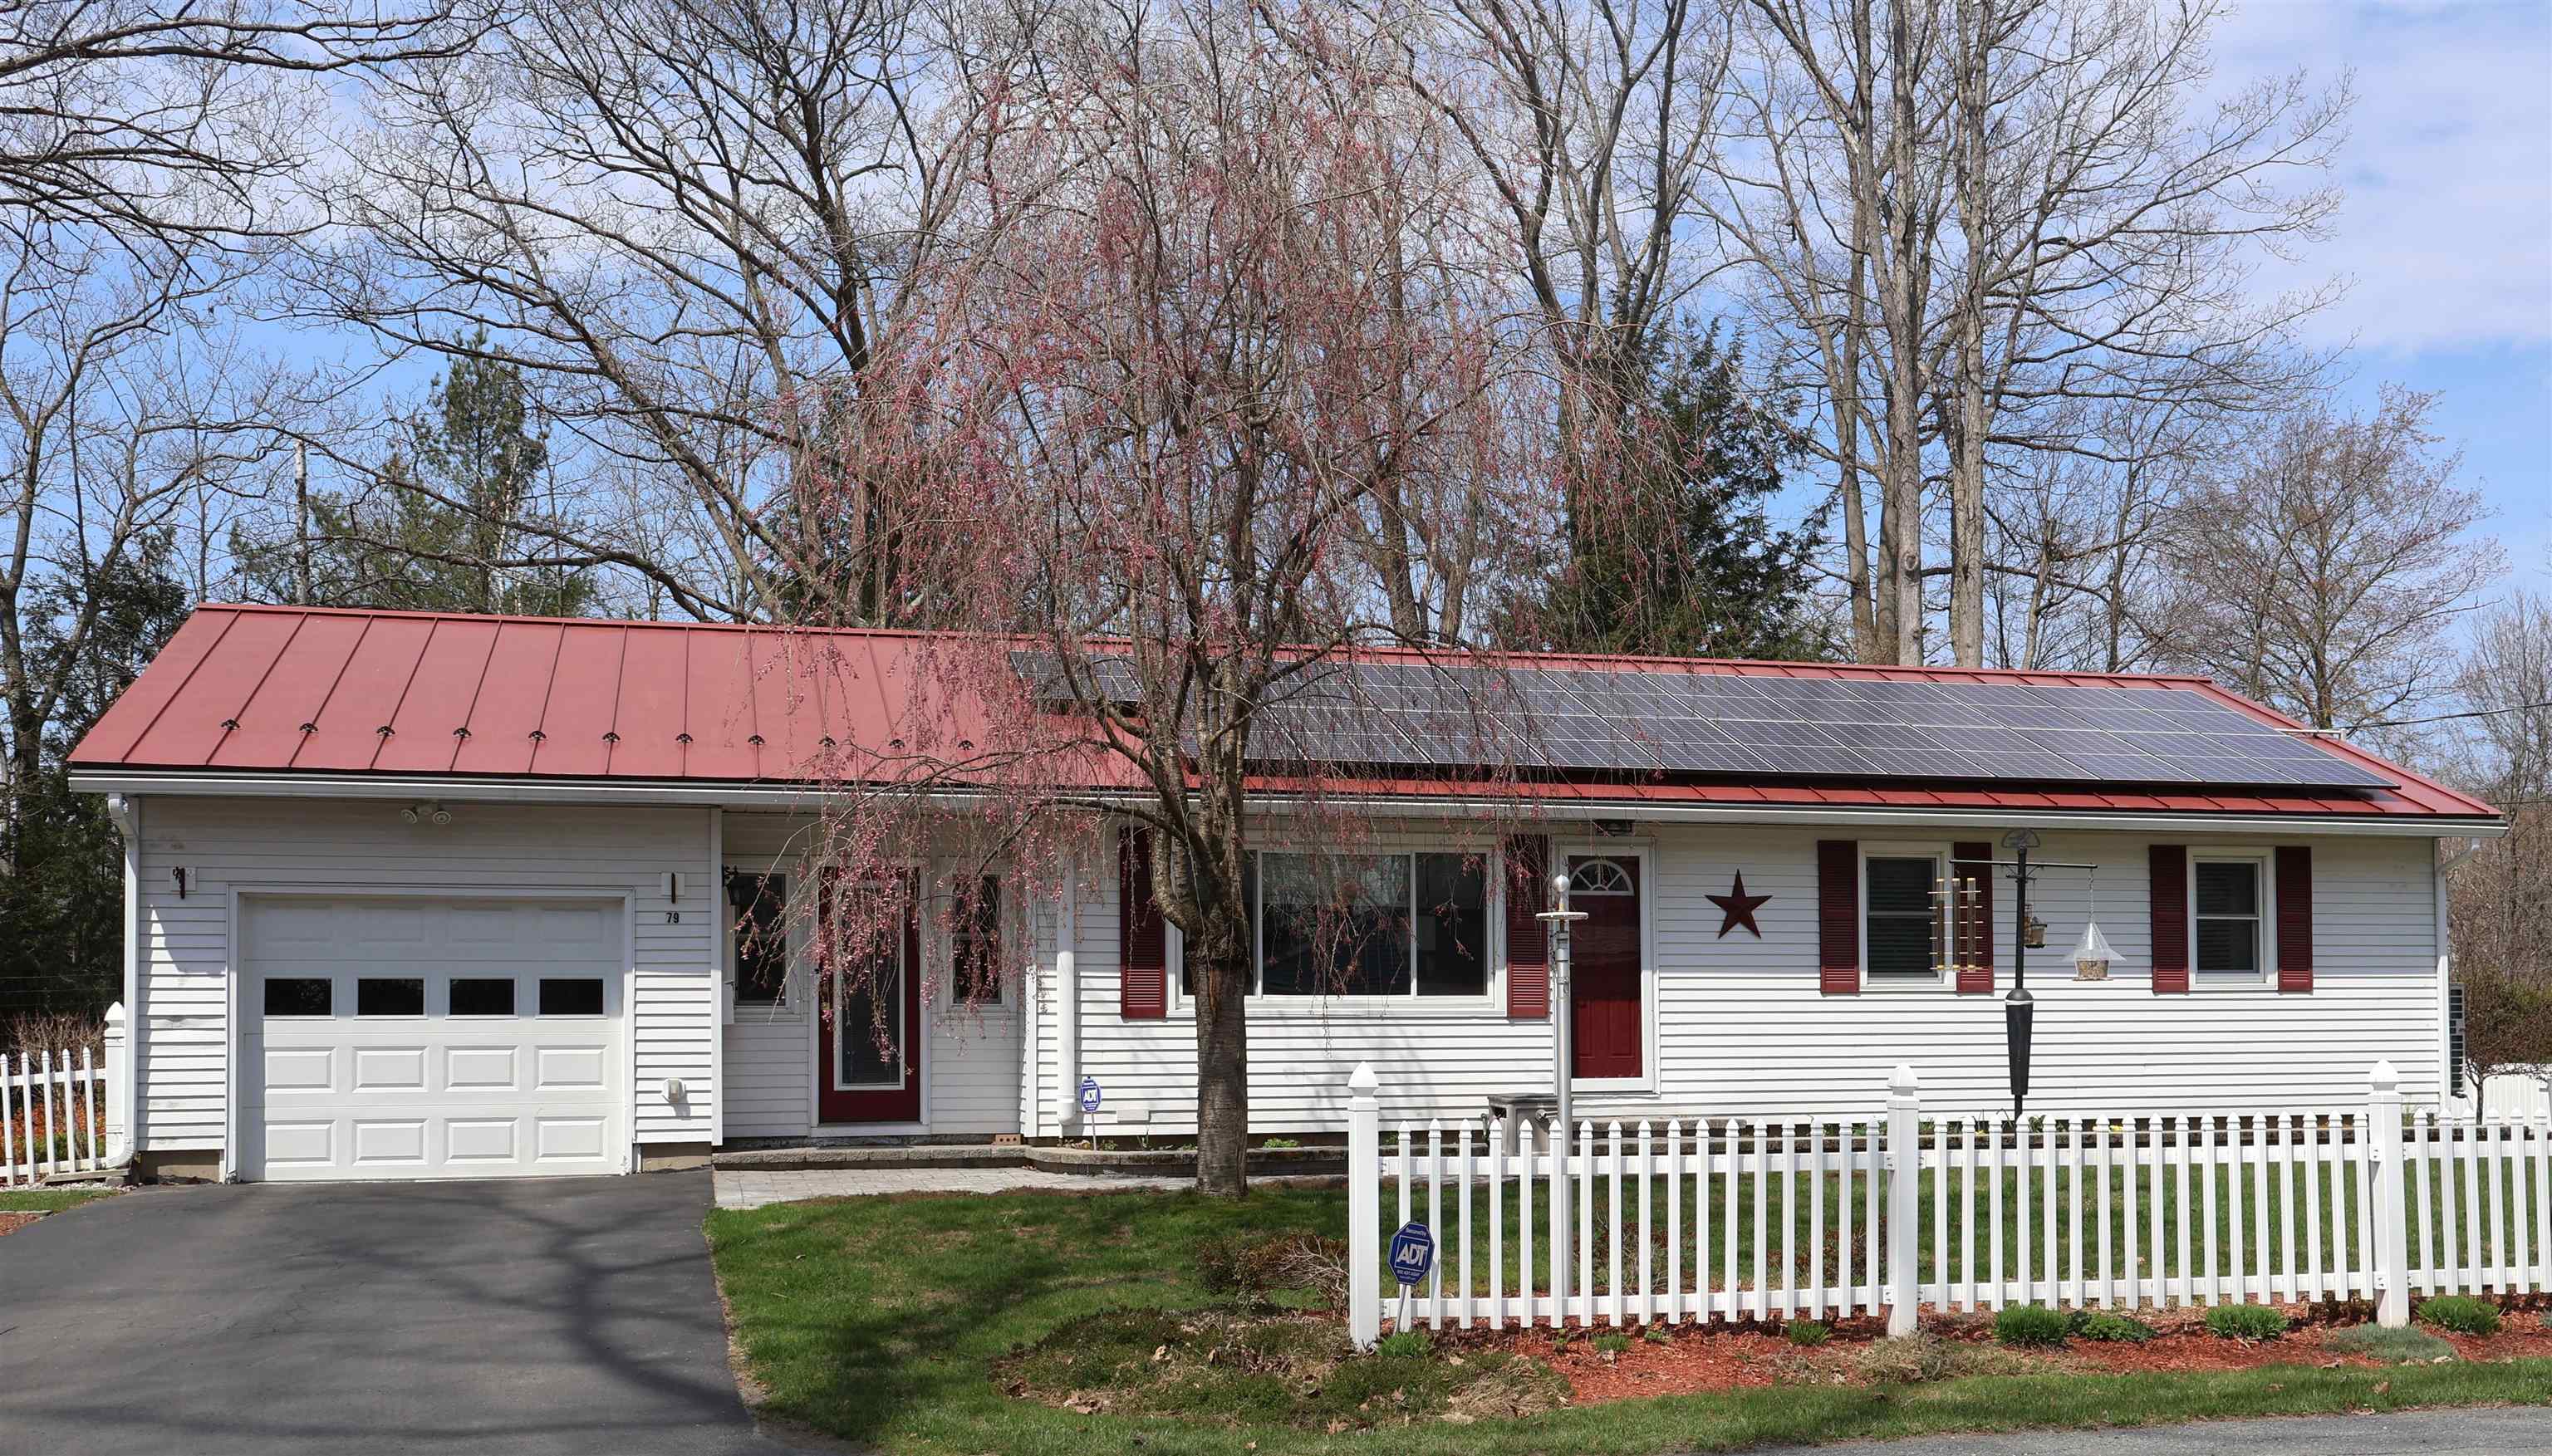 Village of White River Junction in Town of Hartford VT Home for sale $389,900 $329 per sq.ft.